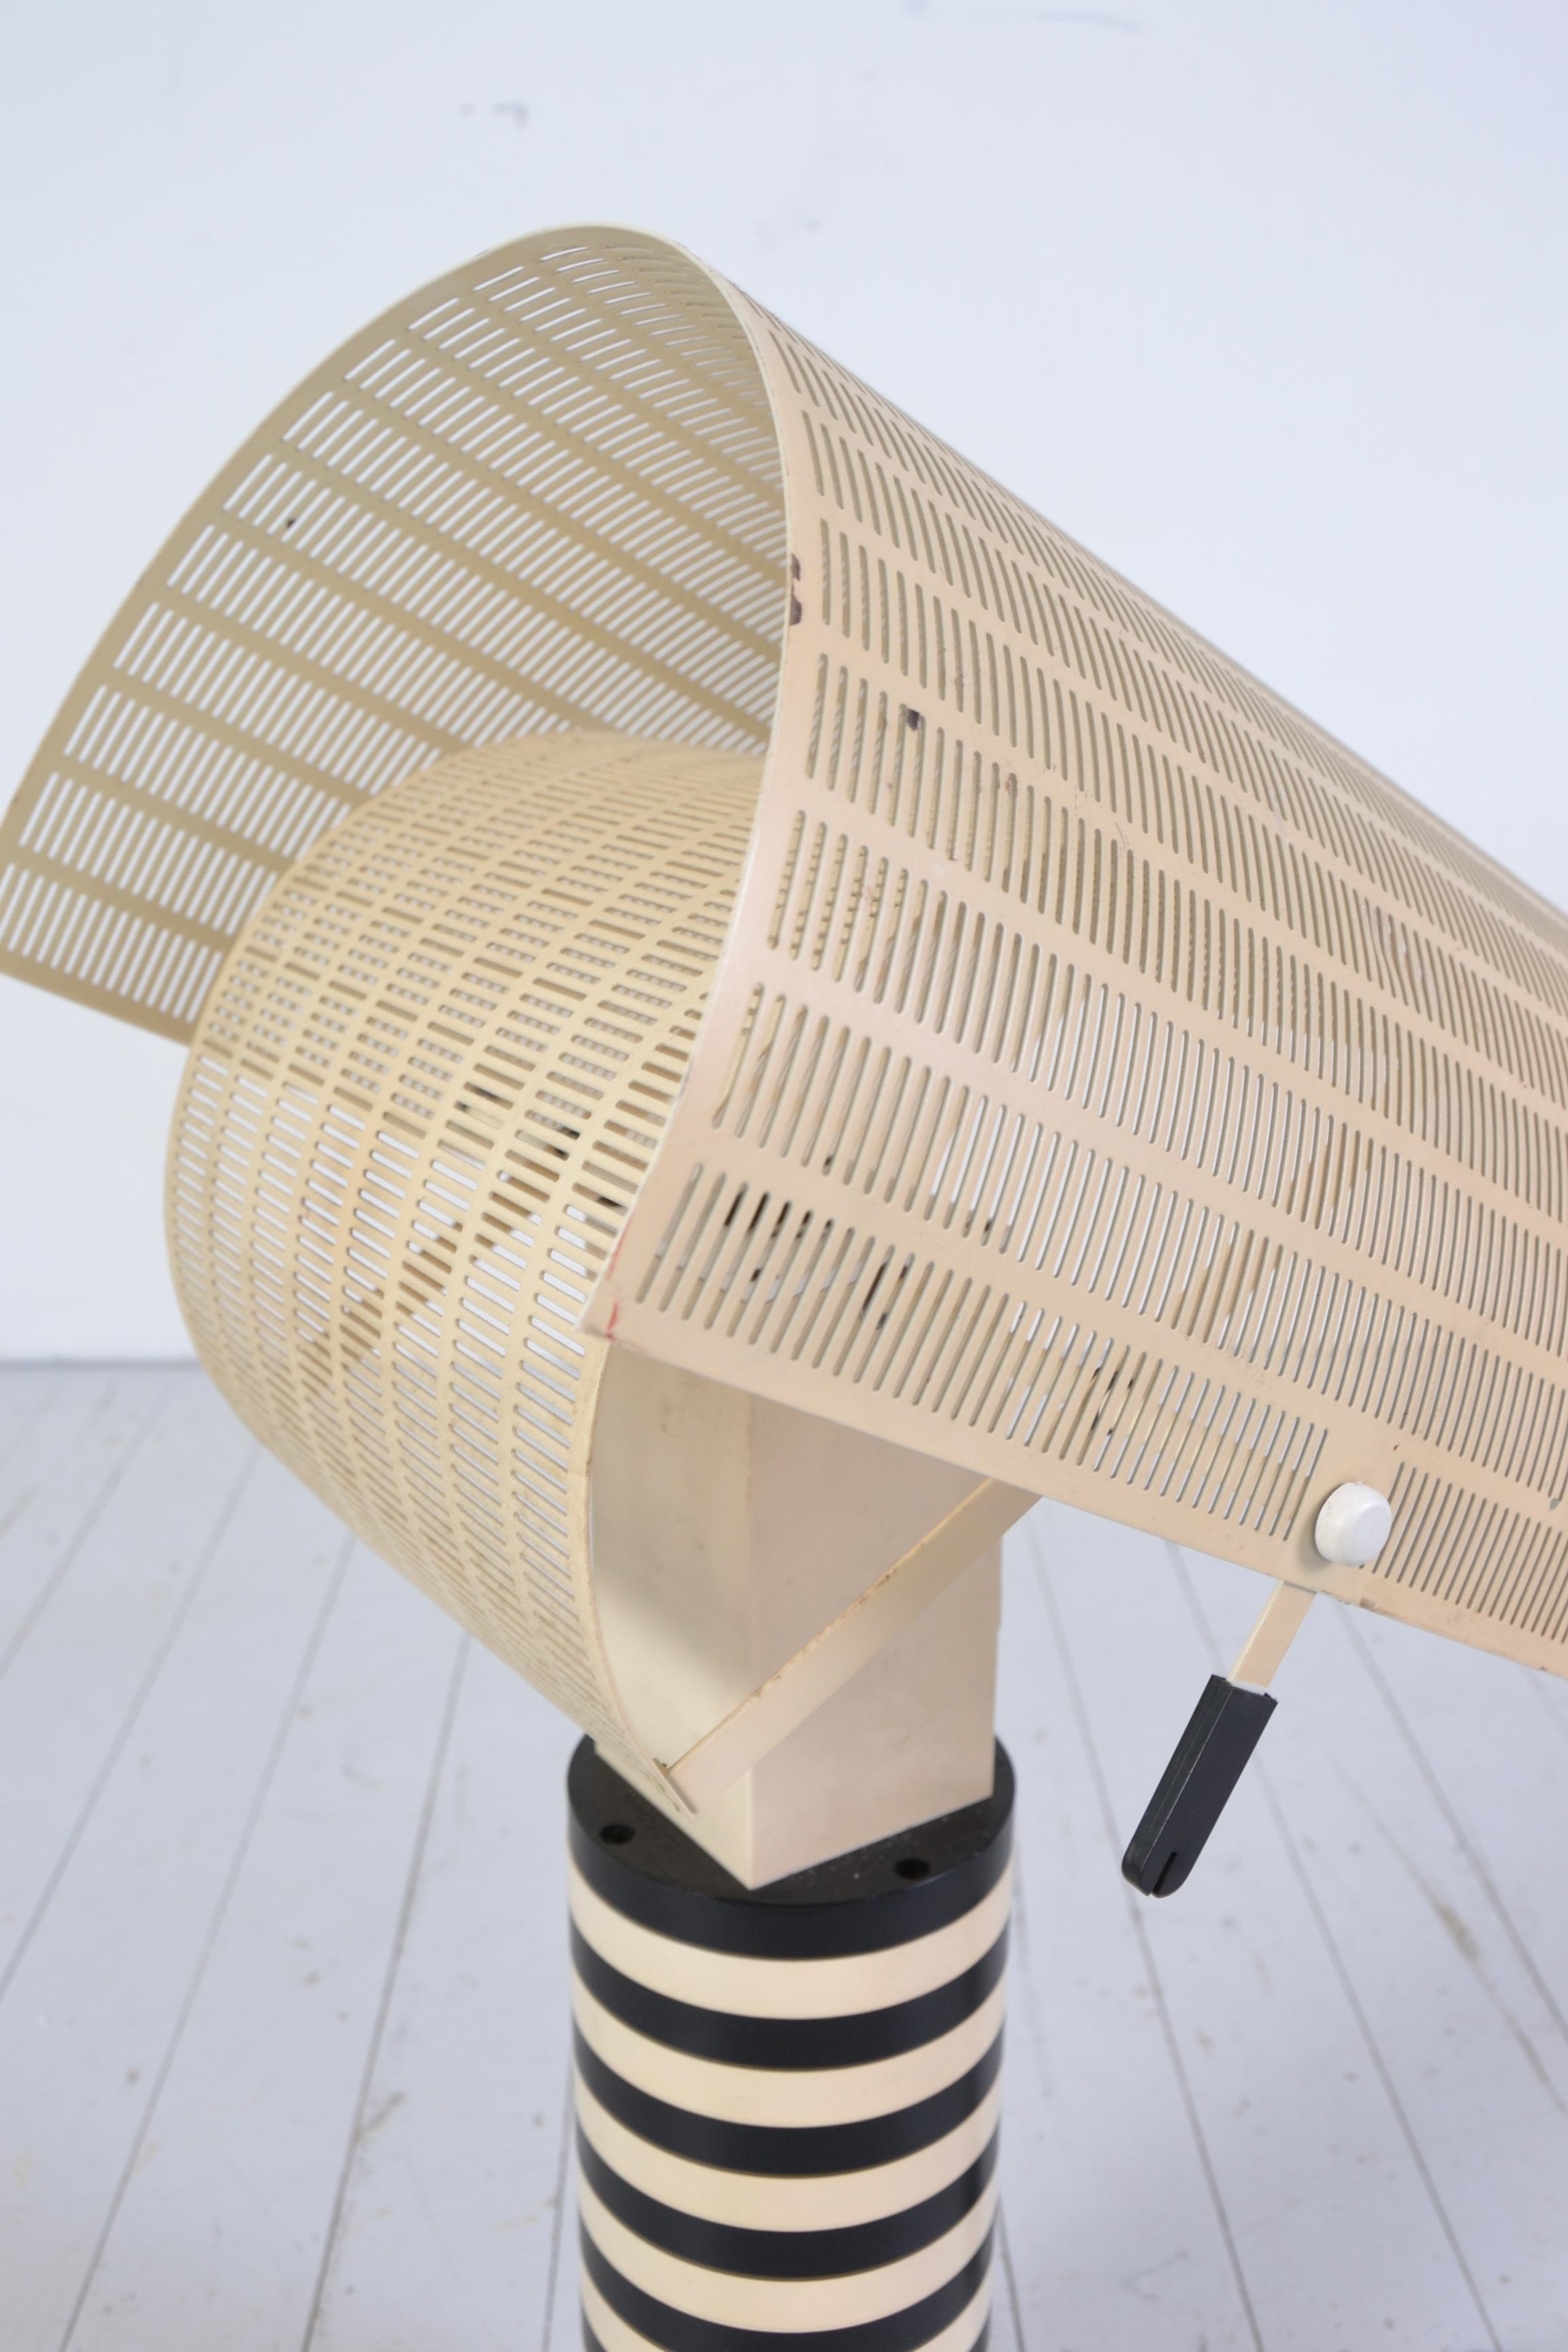 Mario Botta Shogung Lamp 1st Edition 1986 by Artemide In Good Condition For Sale In Untersiggenthal, AG